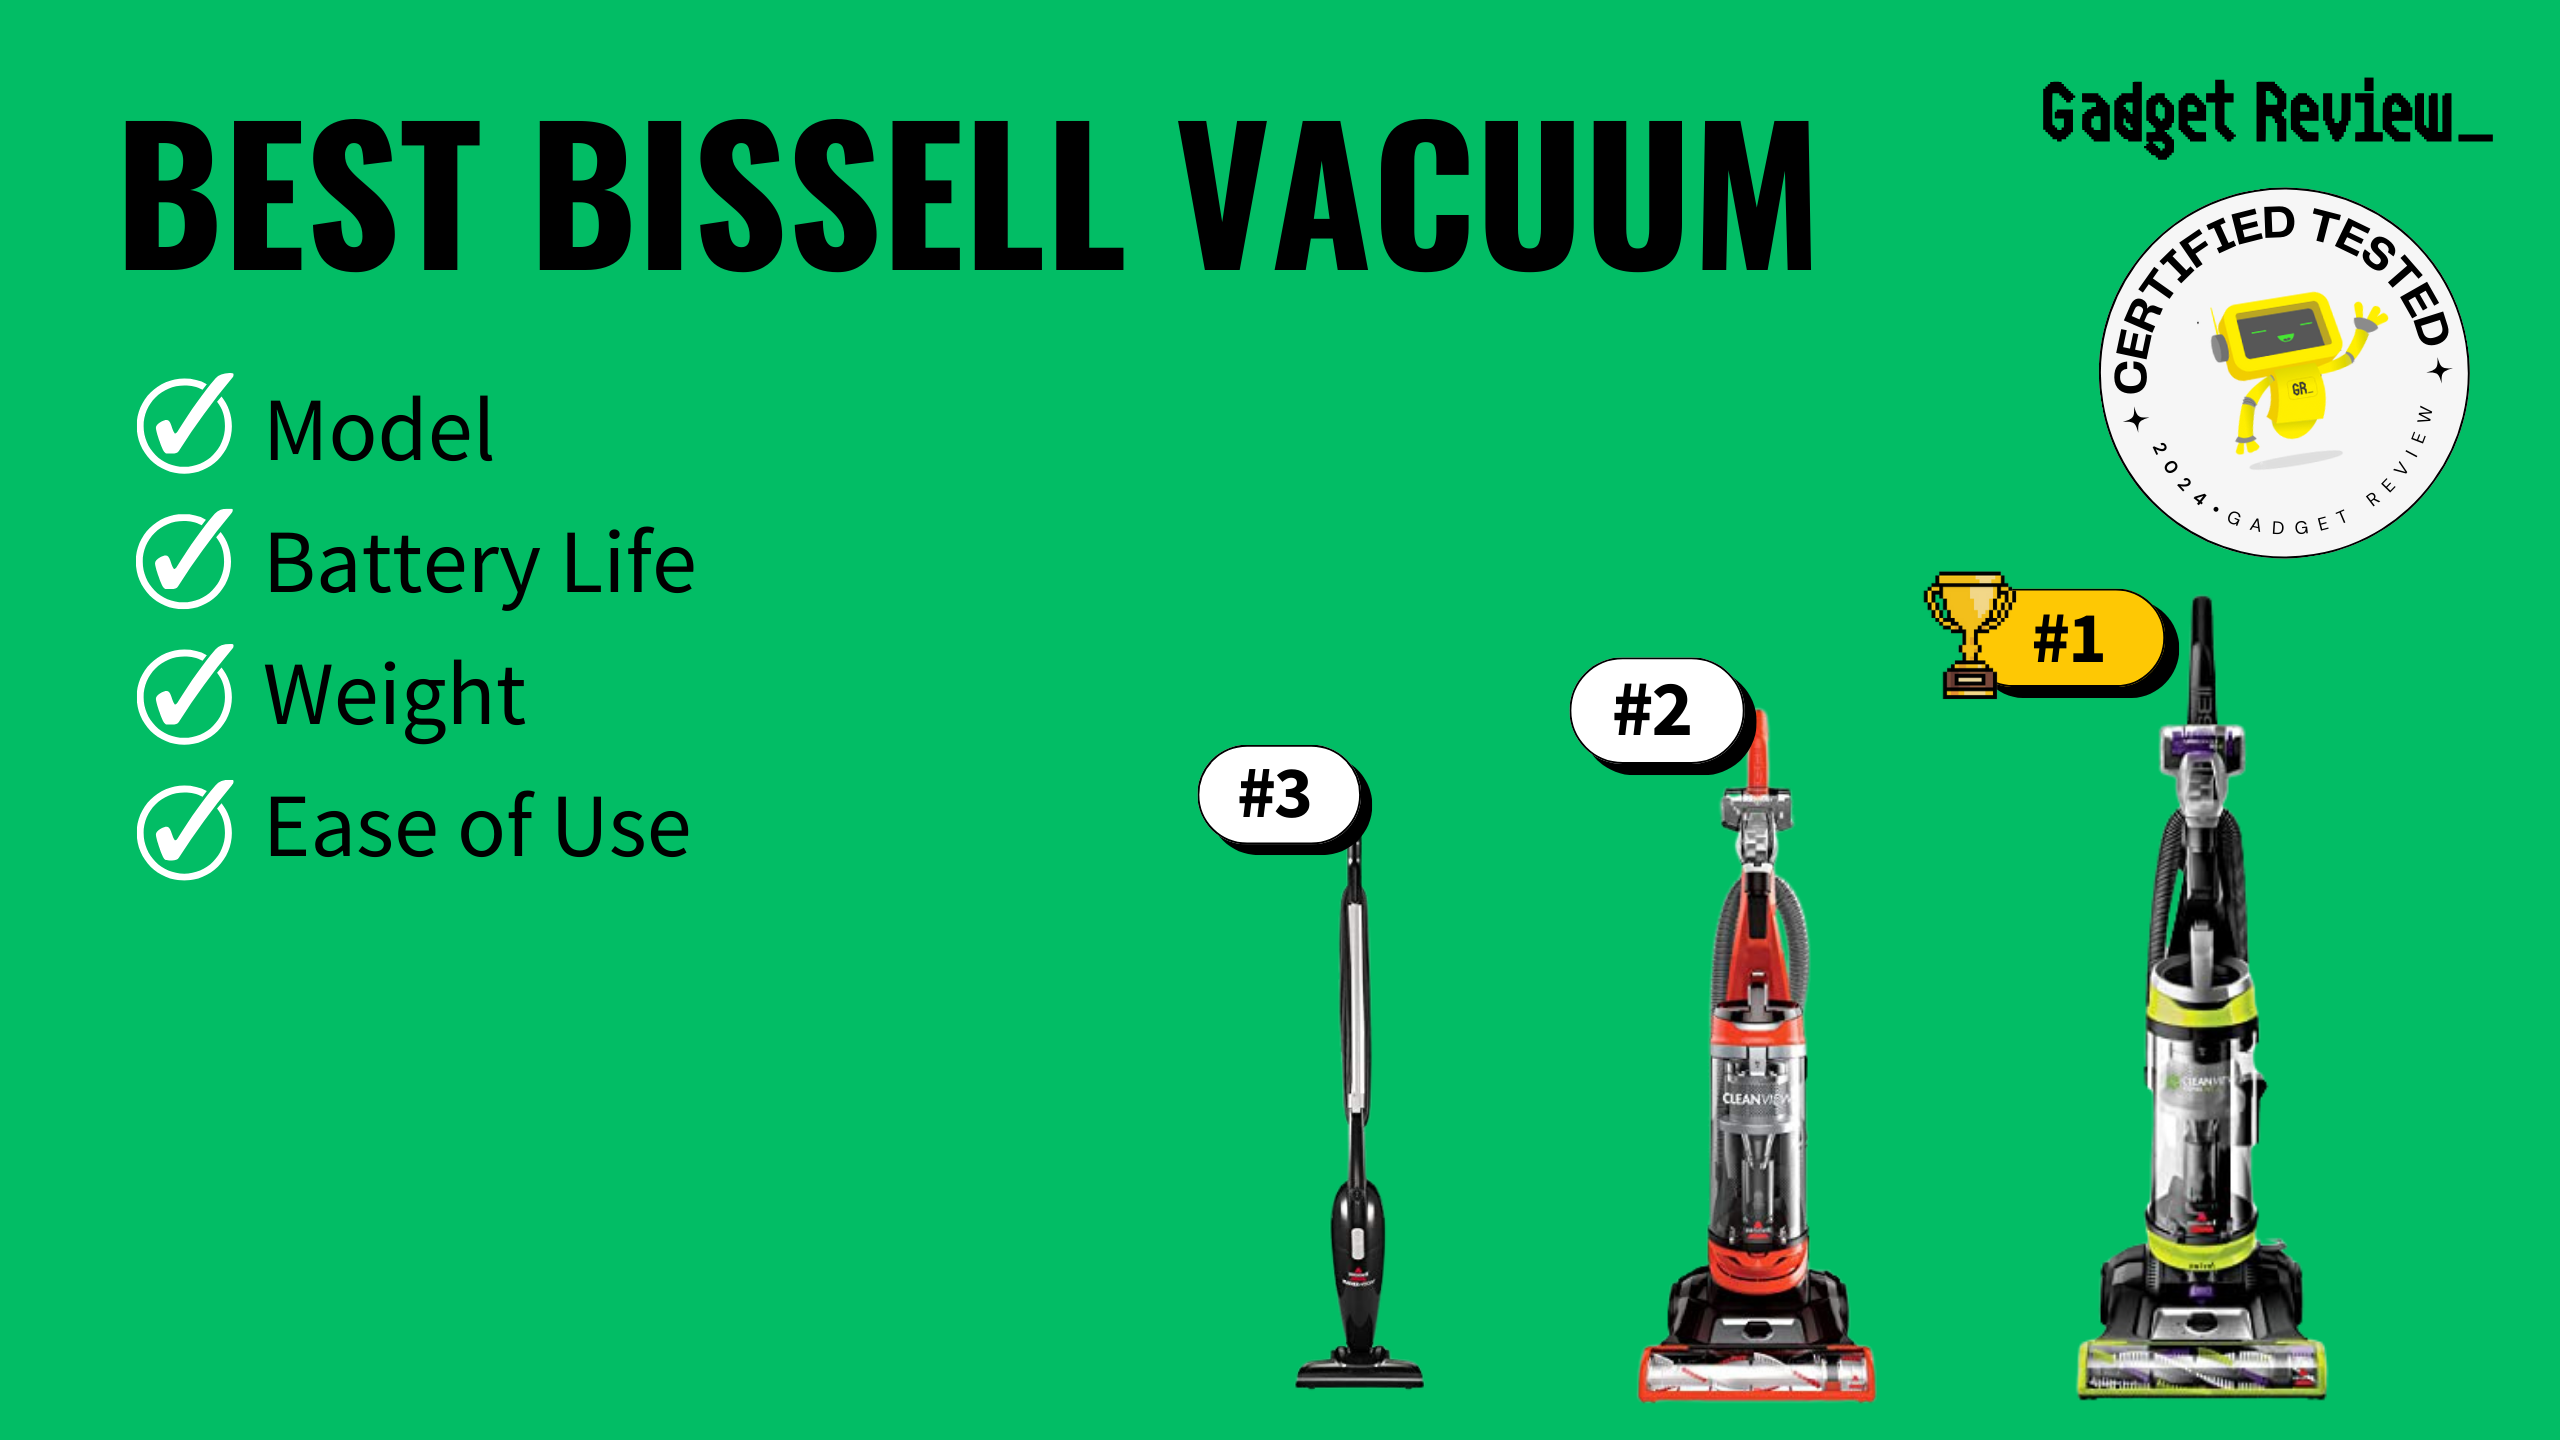 best bissell vacuum guide that shows the top best vacuum cleaner model